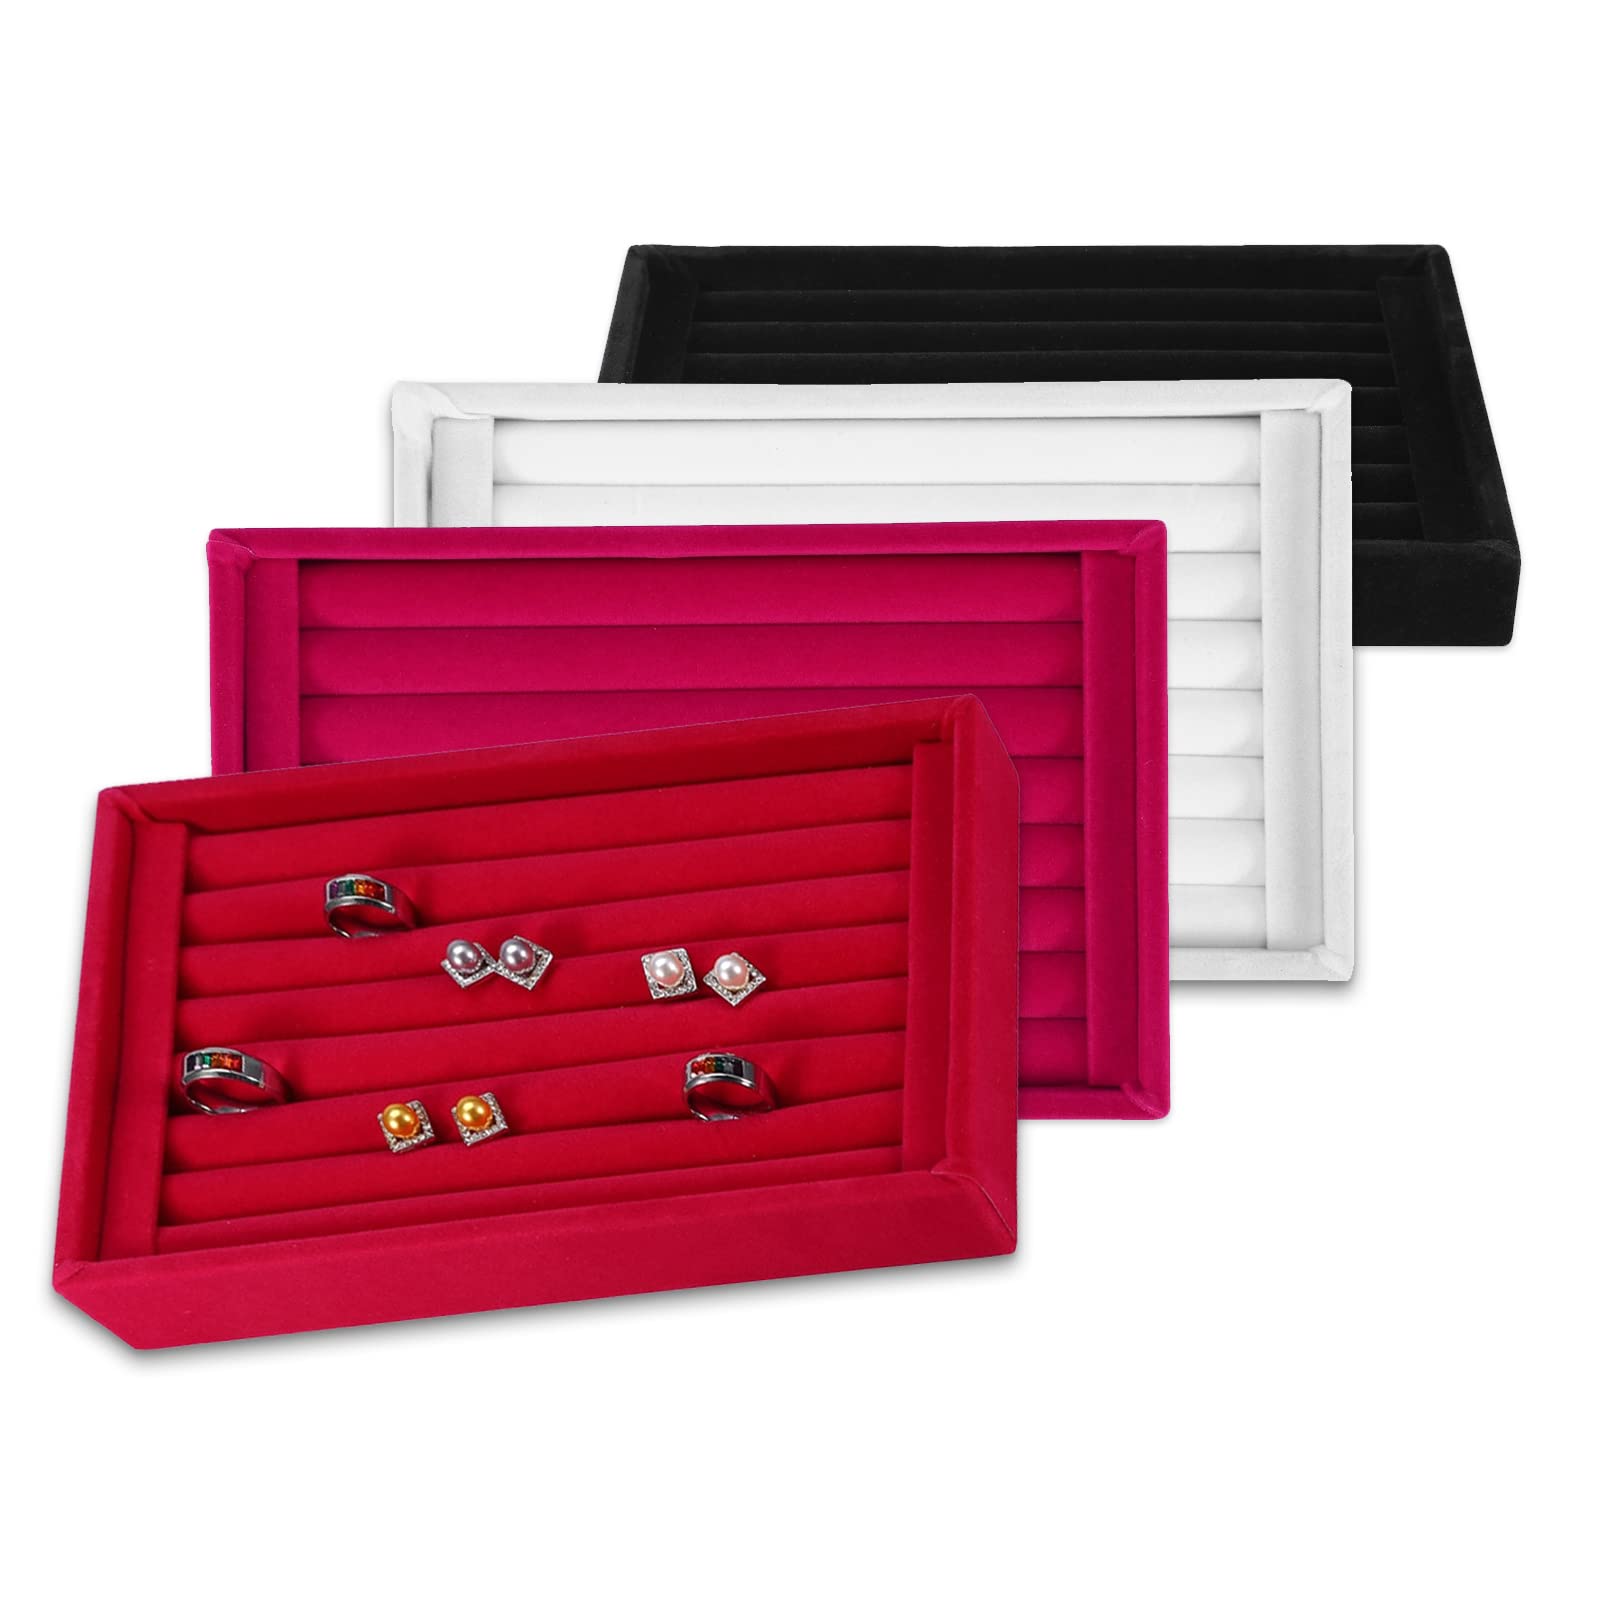 Yuecoom Ring Display Tray, 7 Slots Ring Earrings Showcase Holder, Ring Insert Display Trays, Jewelry Organizer Counter Tray for Rings Earrings Storage, Selling (red)